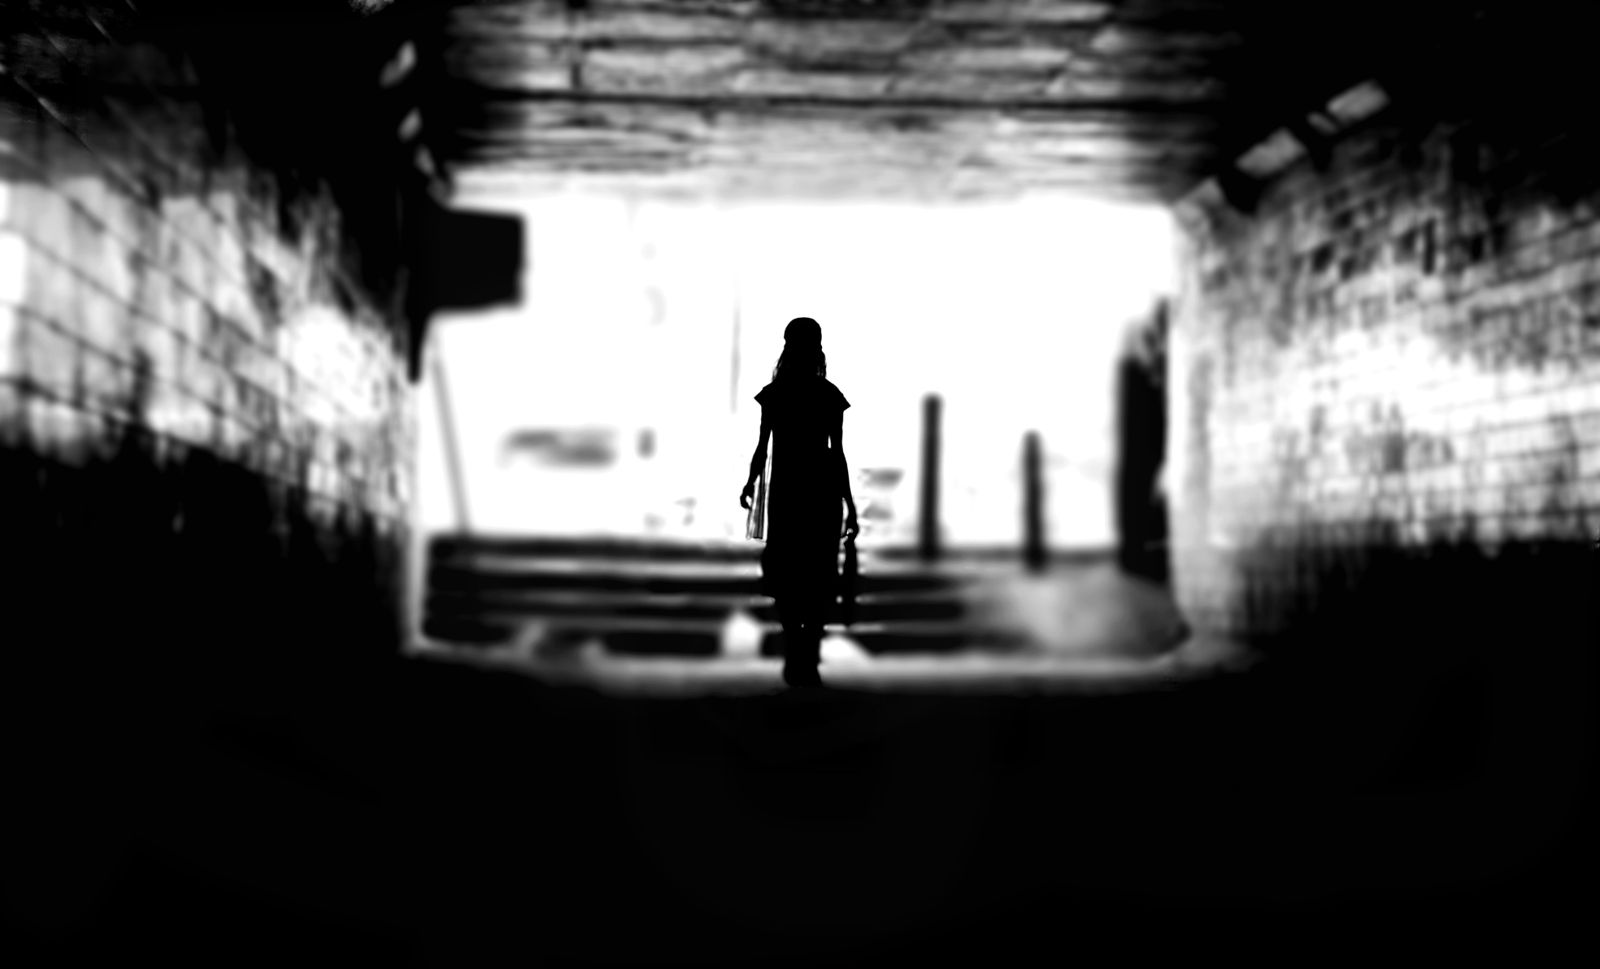 Woman Person Black And White Silhouette Dark Wallpaper.com. Best High Quality Wallpaper